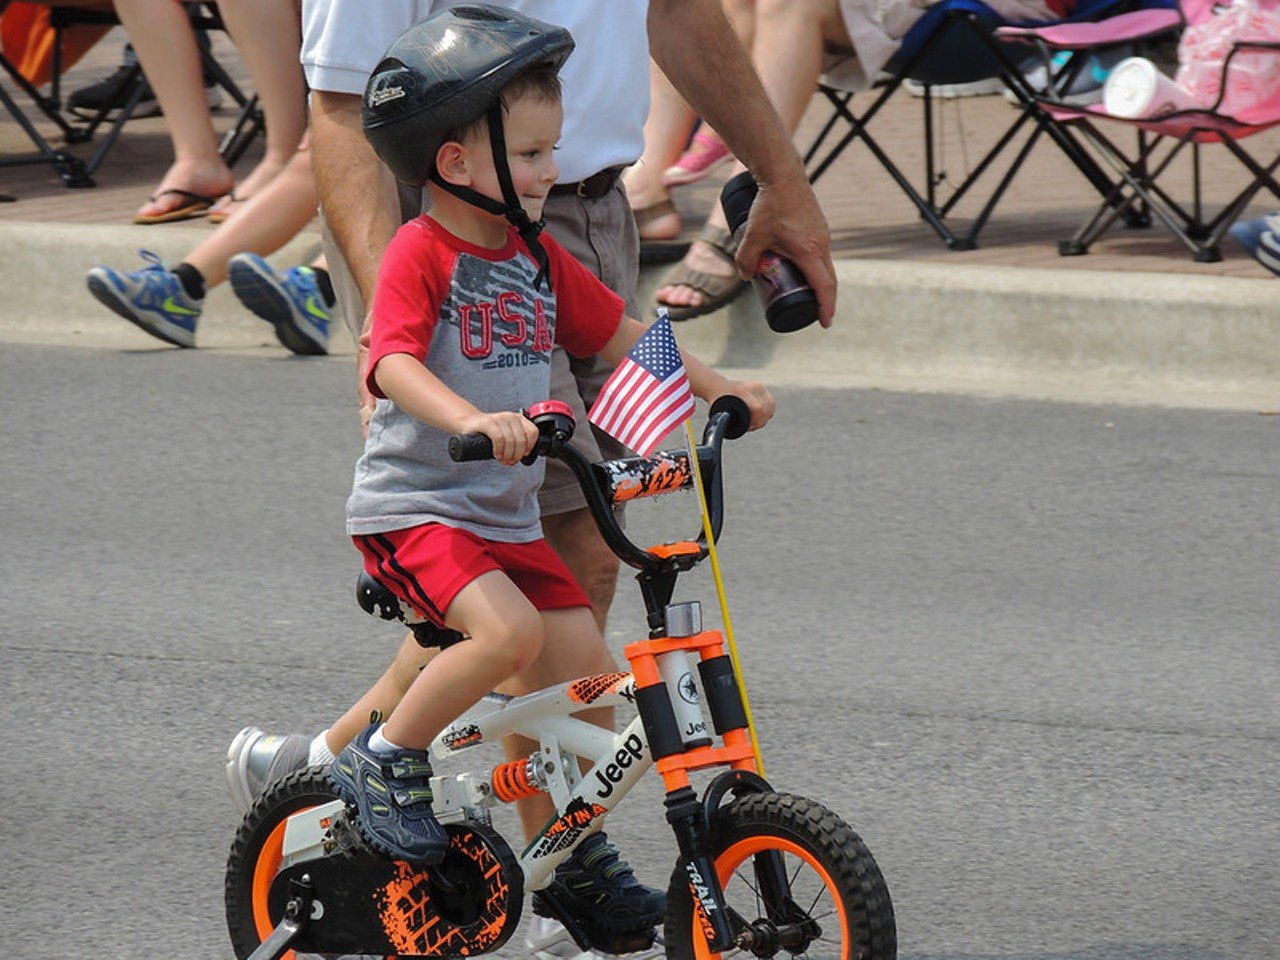 Sayler Park Fourth of July Bike Parade
July 4 from 10-11 a.m.
This fun and creative event is open to kids, teenagers and adults. Parade participants will meet up at the Cincinnati Recreation Center to decorate bikes followed by a paradefrom the rec center to Sayler Park. Light refreshments will be provided after the parade and prizes for the best decorated bikes will be handed out.
July 4 from 10-11 a.m. Sayler Park, cincinnati-oh.gov.